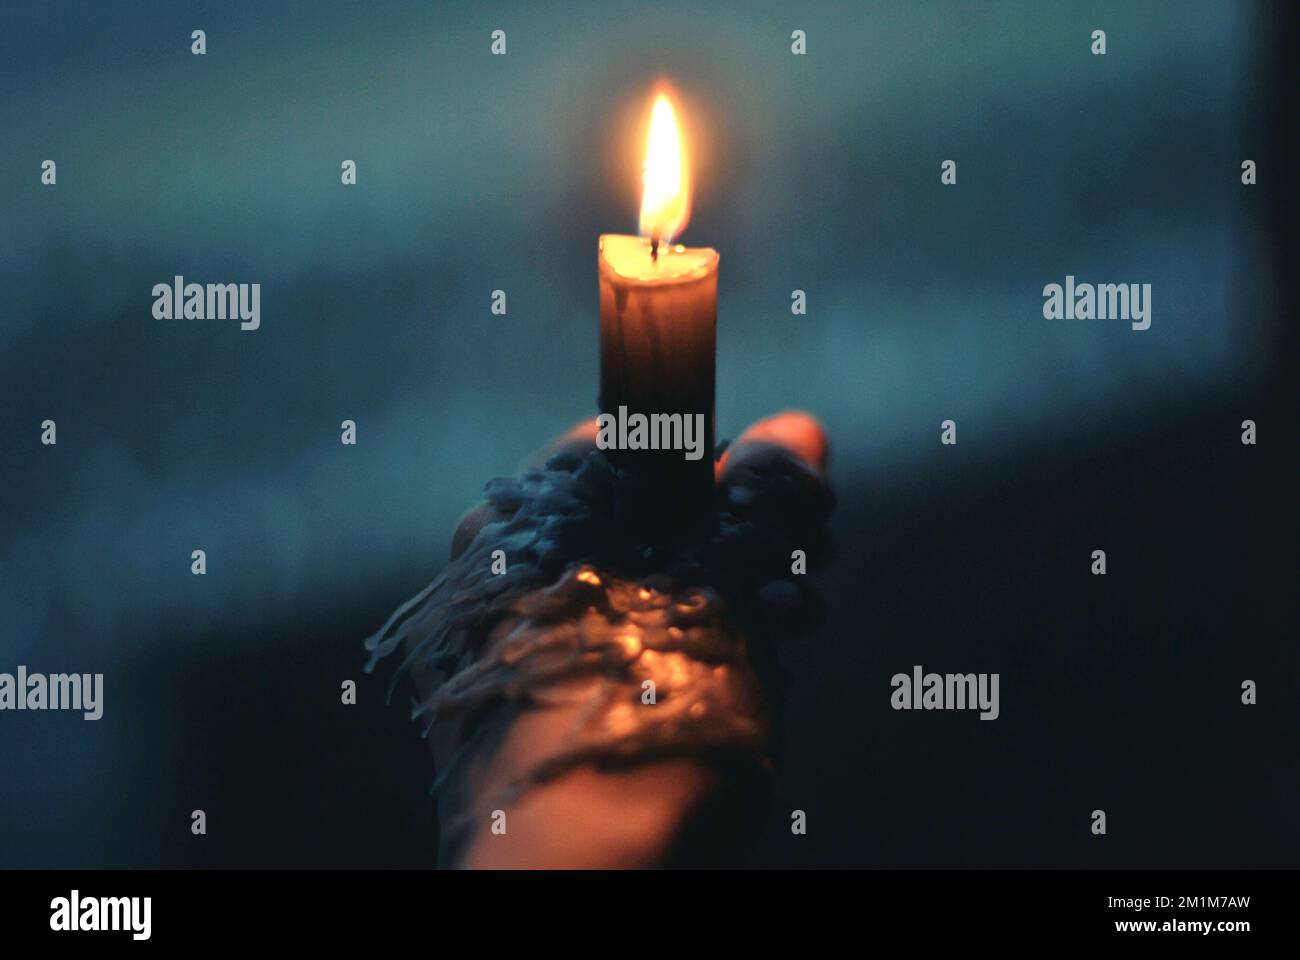 Candle being held by a hand and dripping wax Stock Photo